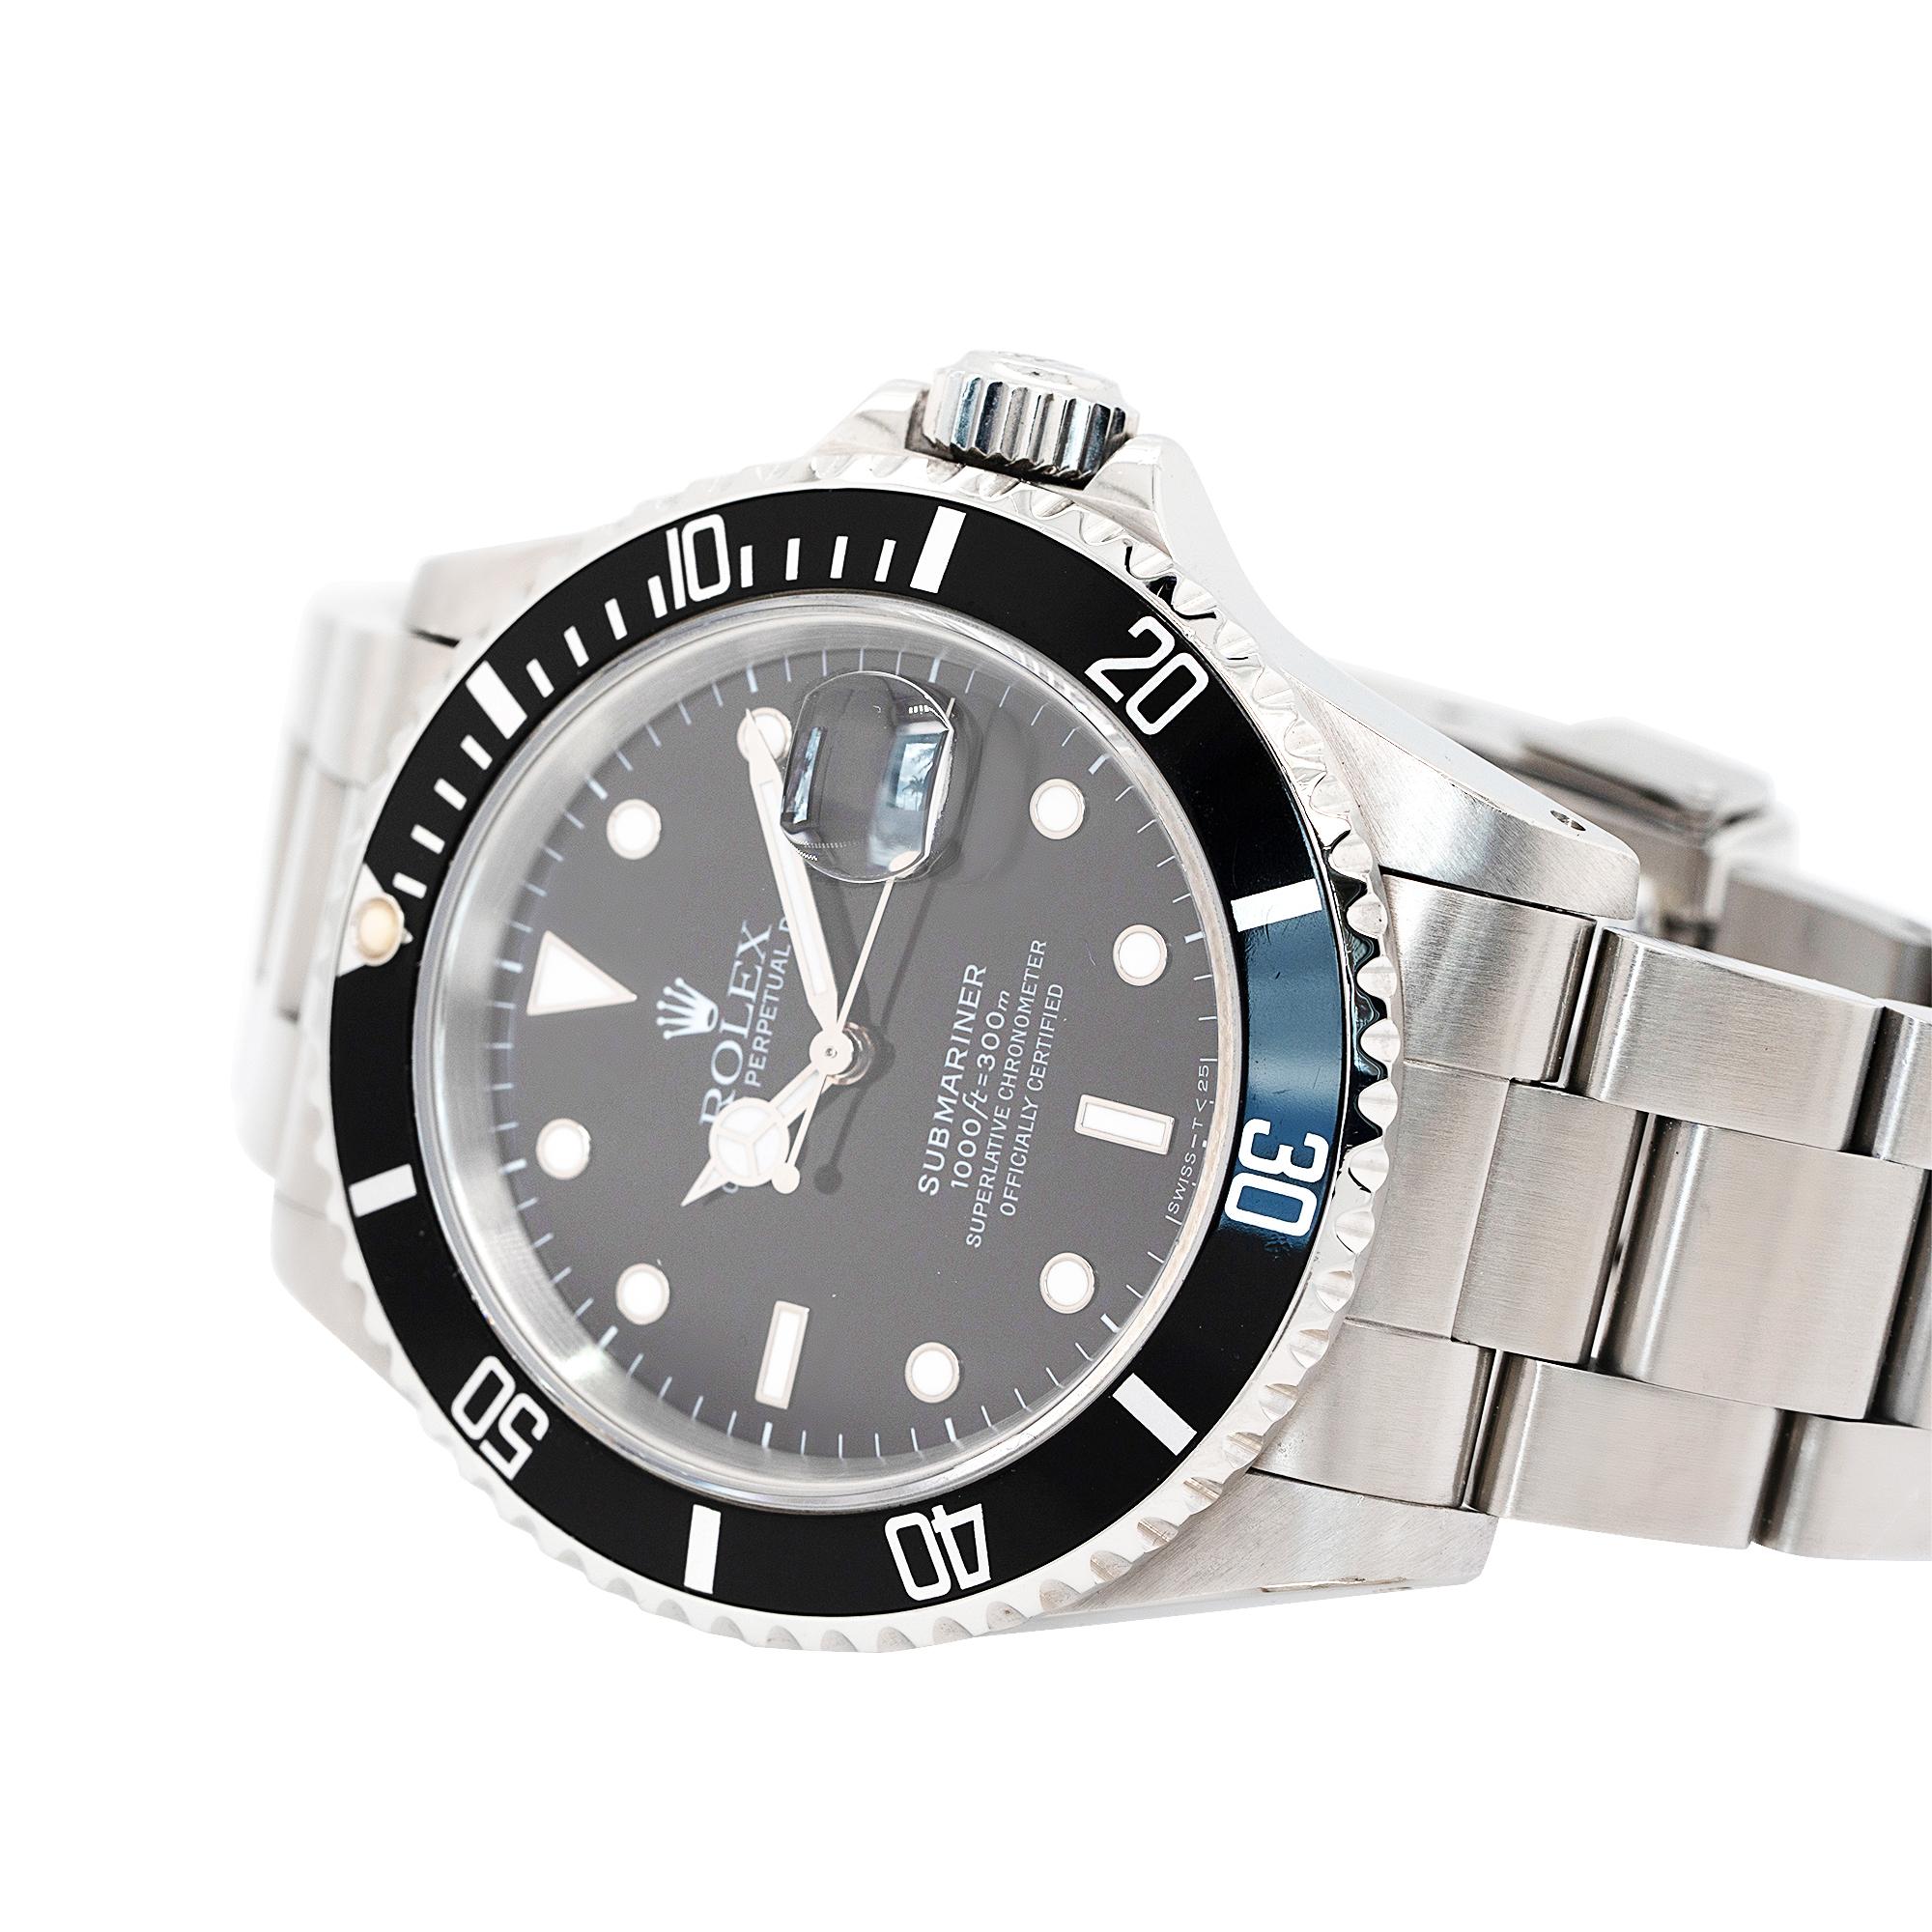 Women's or Men's Rolex Submariner 16610 Stainless Steel Automatic Men's Watch For Sale